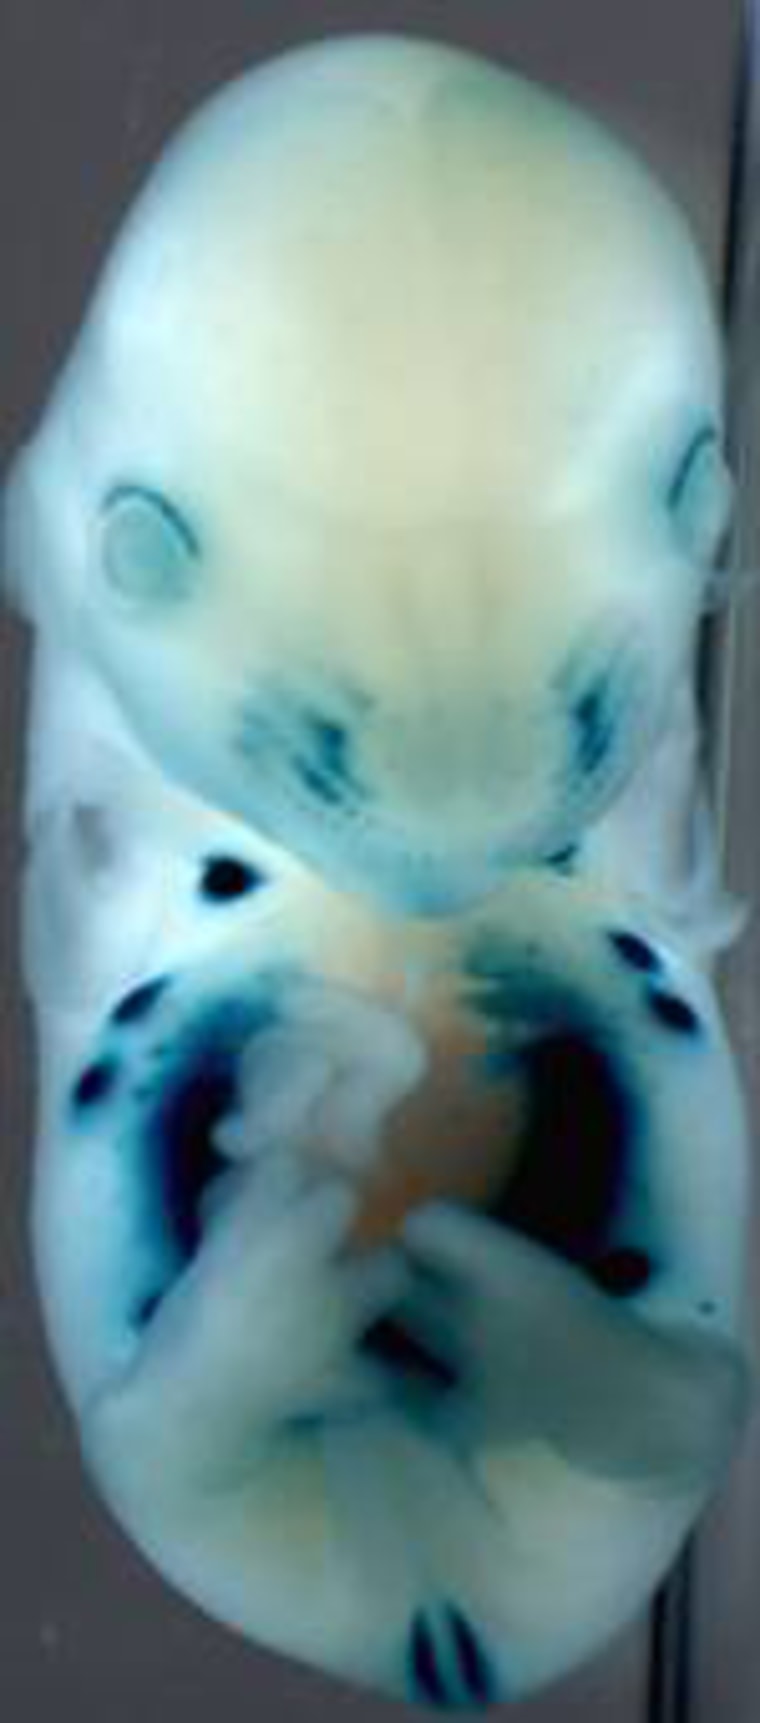 Scientists worked with genetically engineered mouse embryos to see whether the deletion of "junk DNA" sequences affected the activation of genes in specific tissues. This photo shows that the tissues (marked in blue) were largely unaffected.